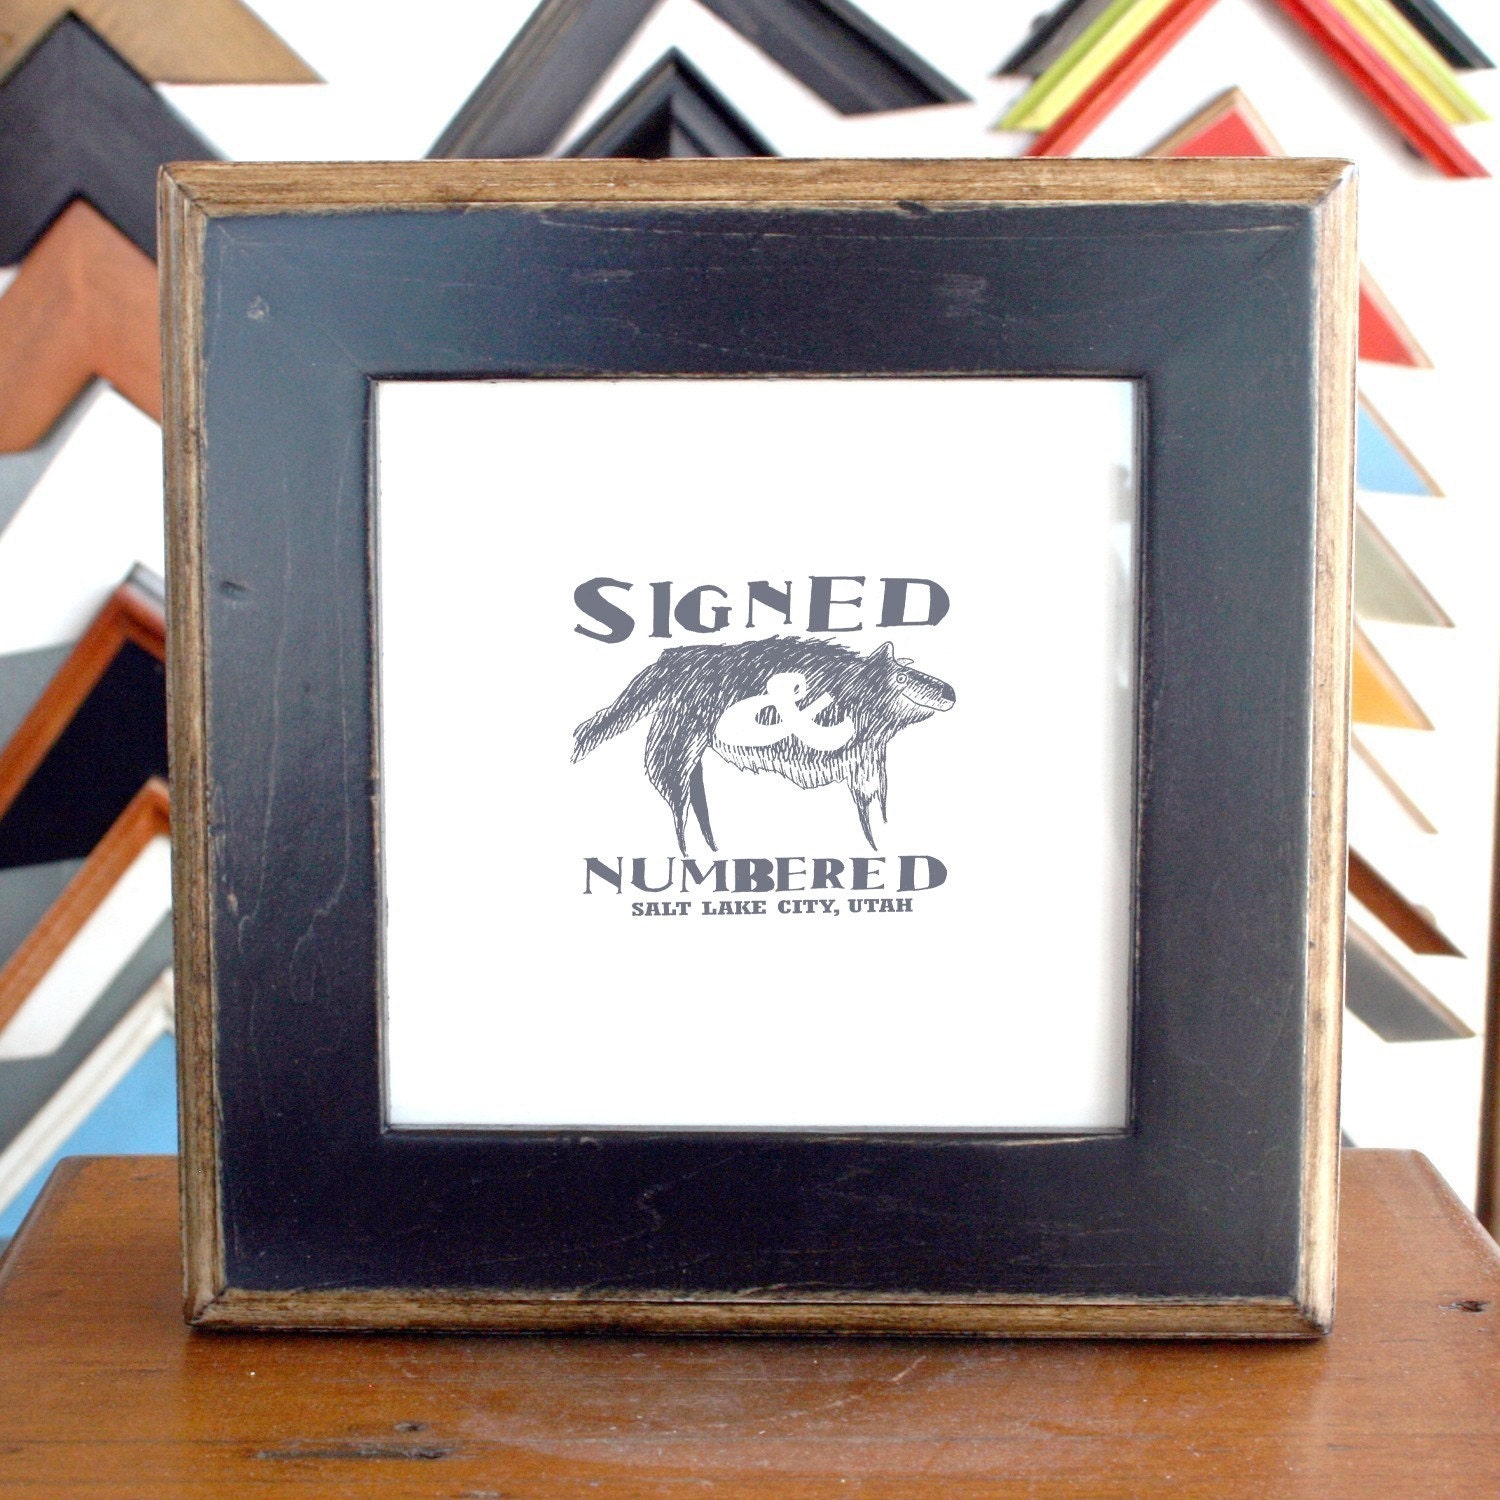 6x6 Picture Frame with Vintage Black 2 Tone Finish - SAME DAY SHIPPING